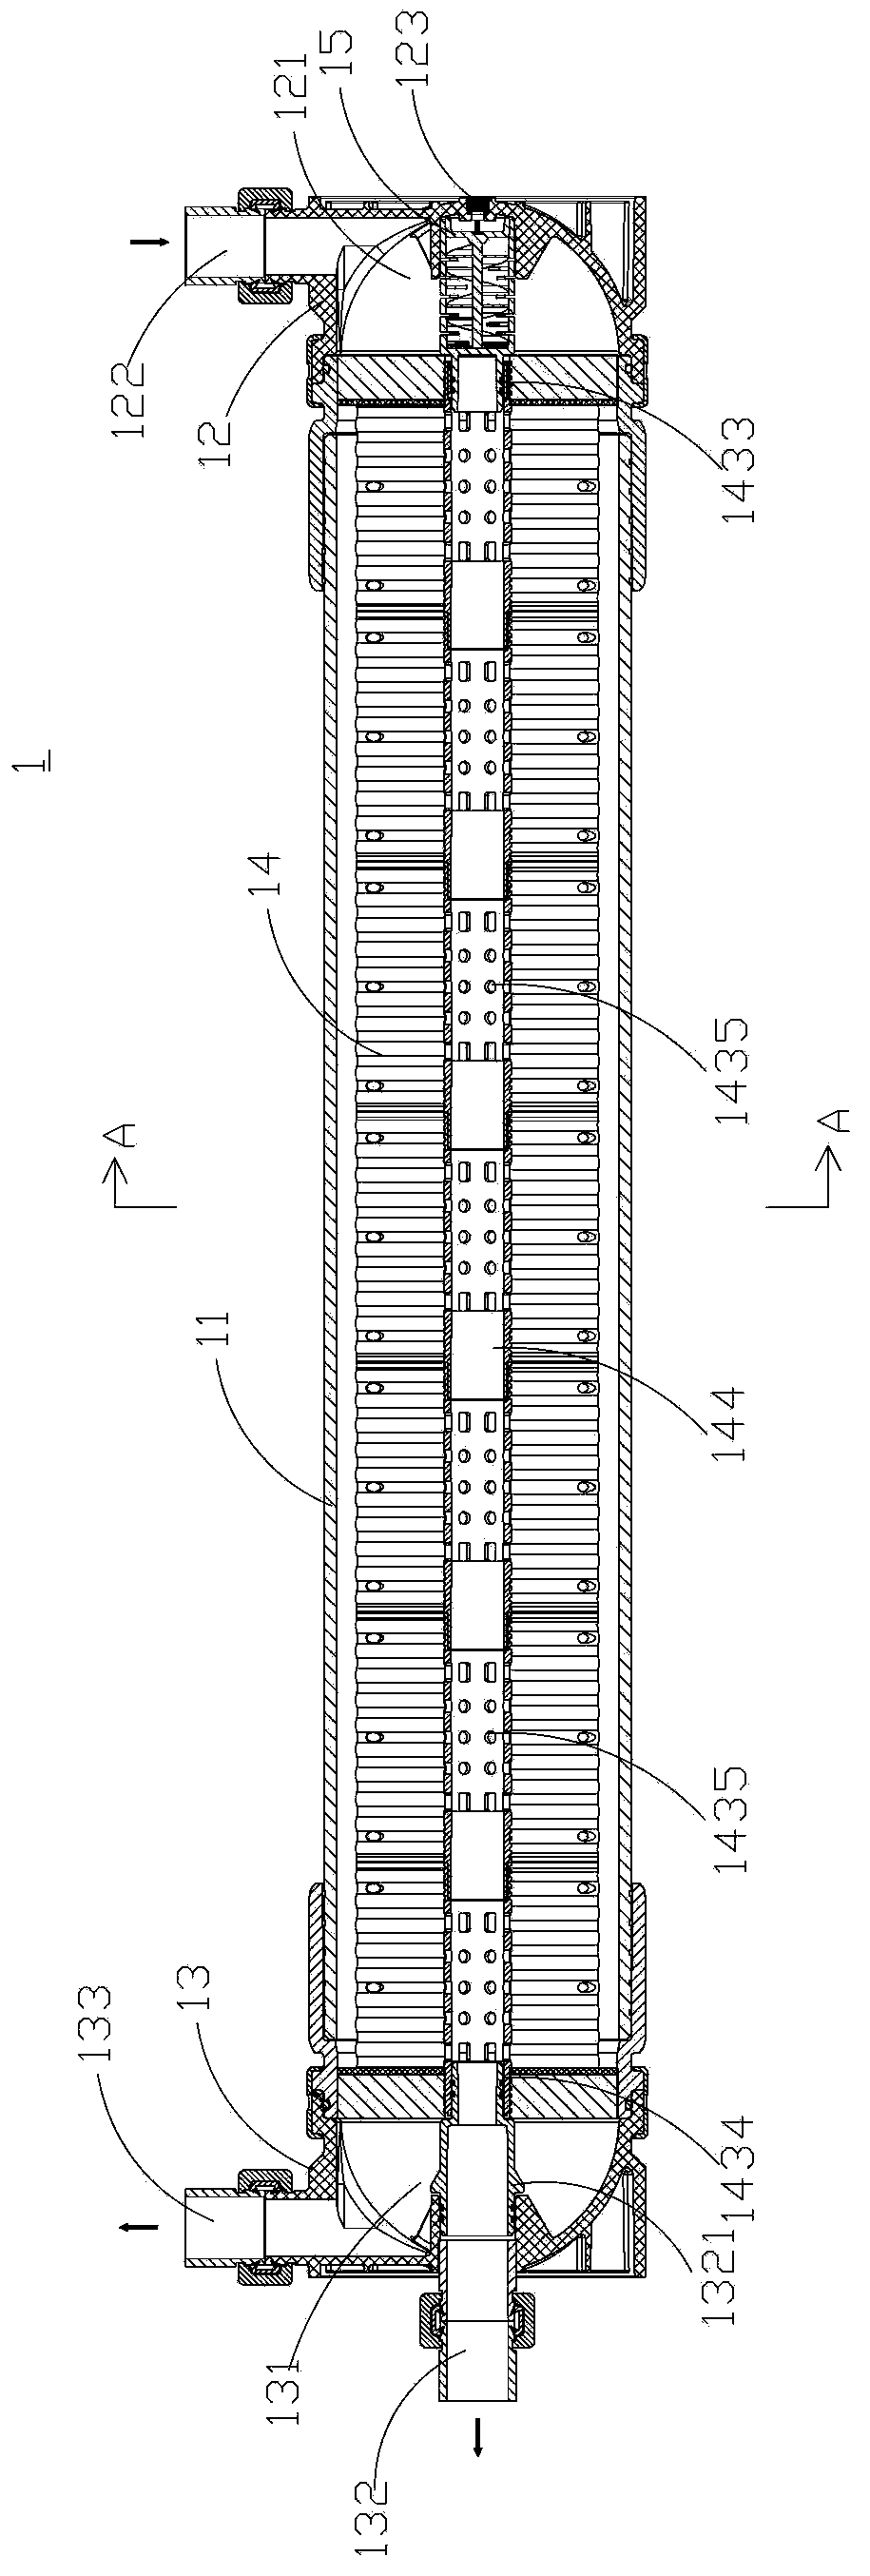 Hollow fiber membrane module and water treatment apparatus with it